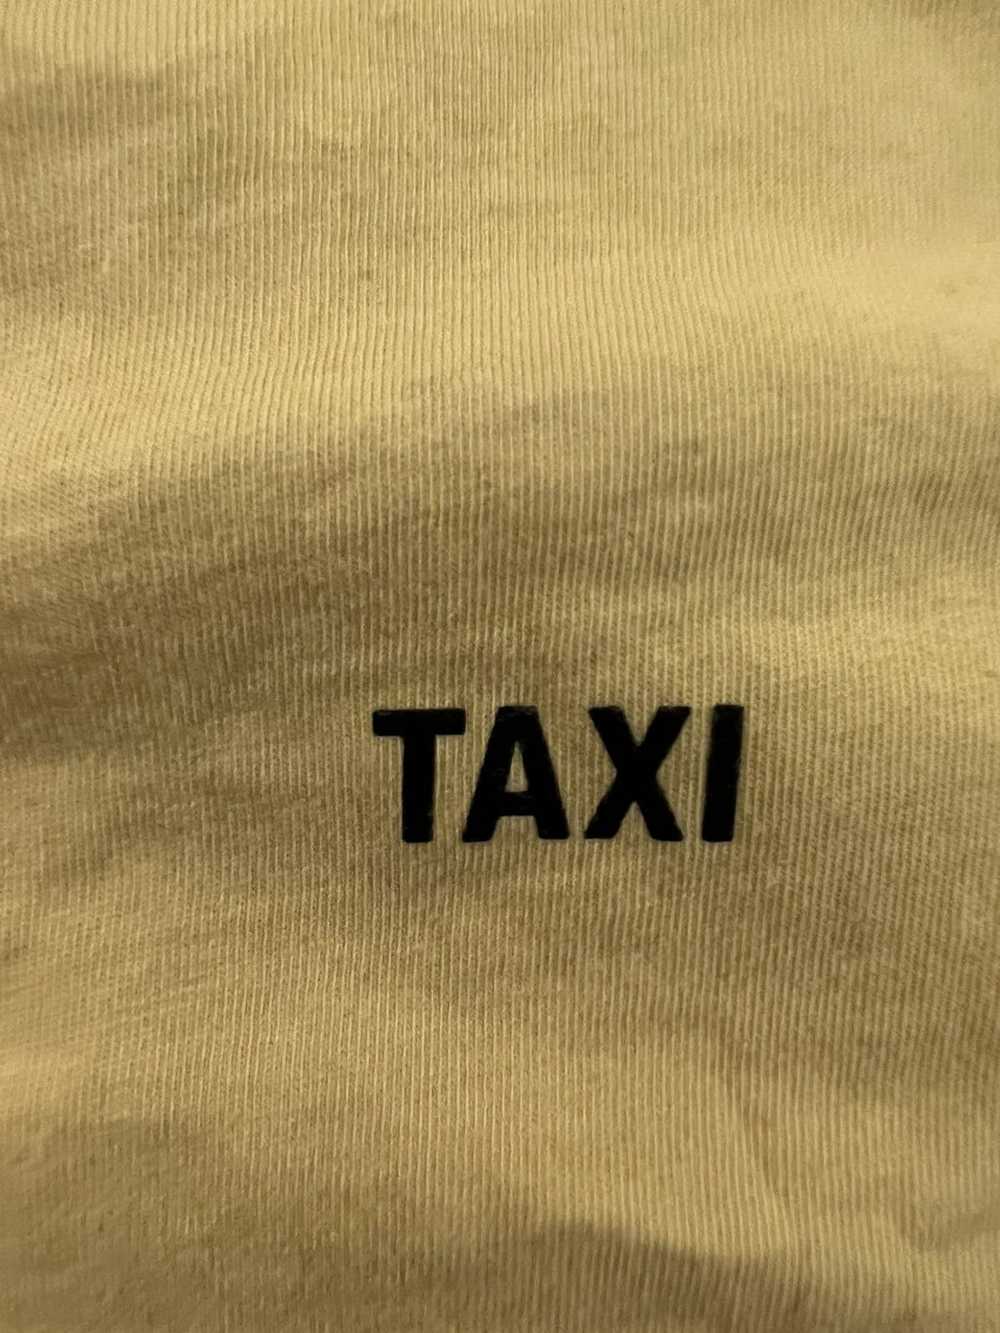 Helmut Lang Helmut Lang Yellow Taxi Tee - image 4